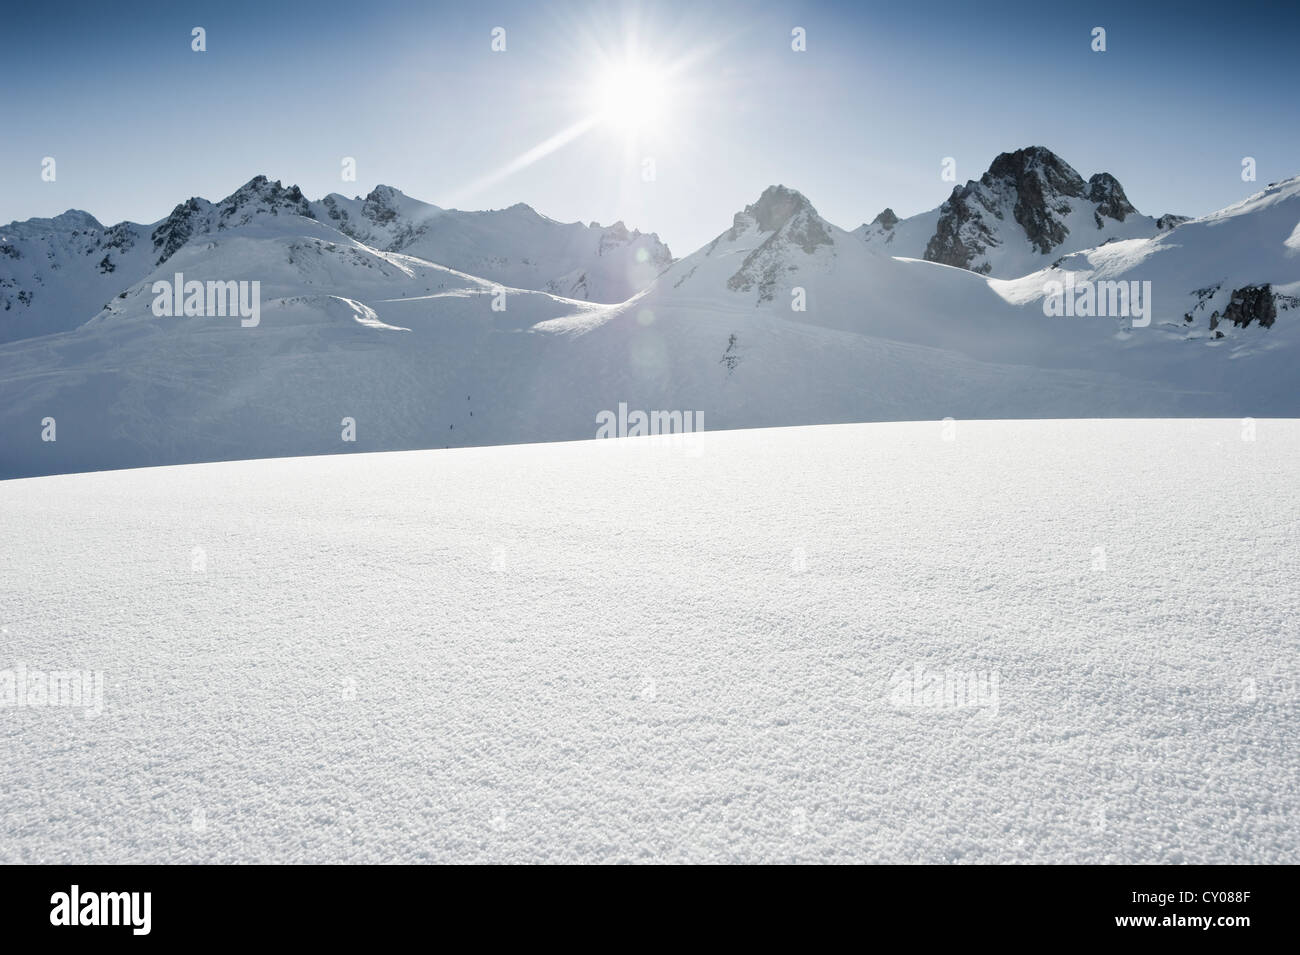 Deep snow with mountain peaks and the sun, Tignes, Val d'Isere, Savoie, Alps, France, Europe Stock Photo